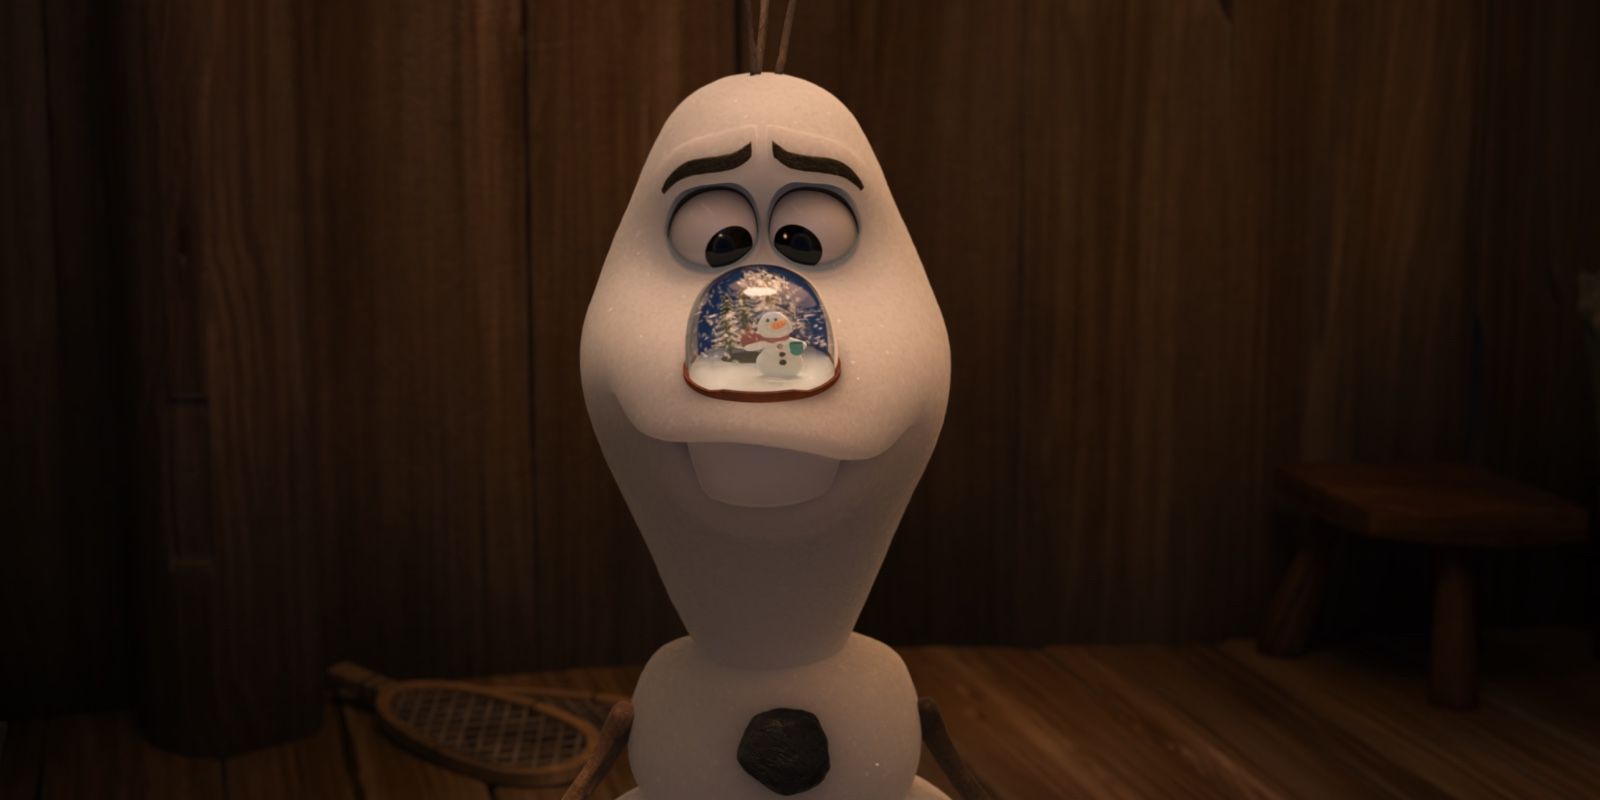 Olaf in Once Upon a Snowman with a snowglobe resting on his face